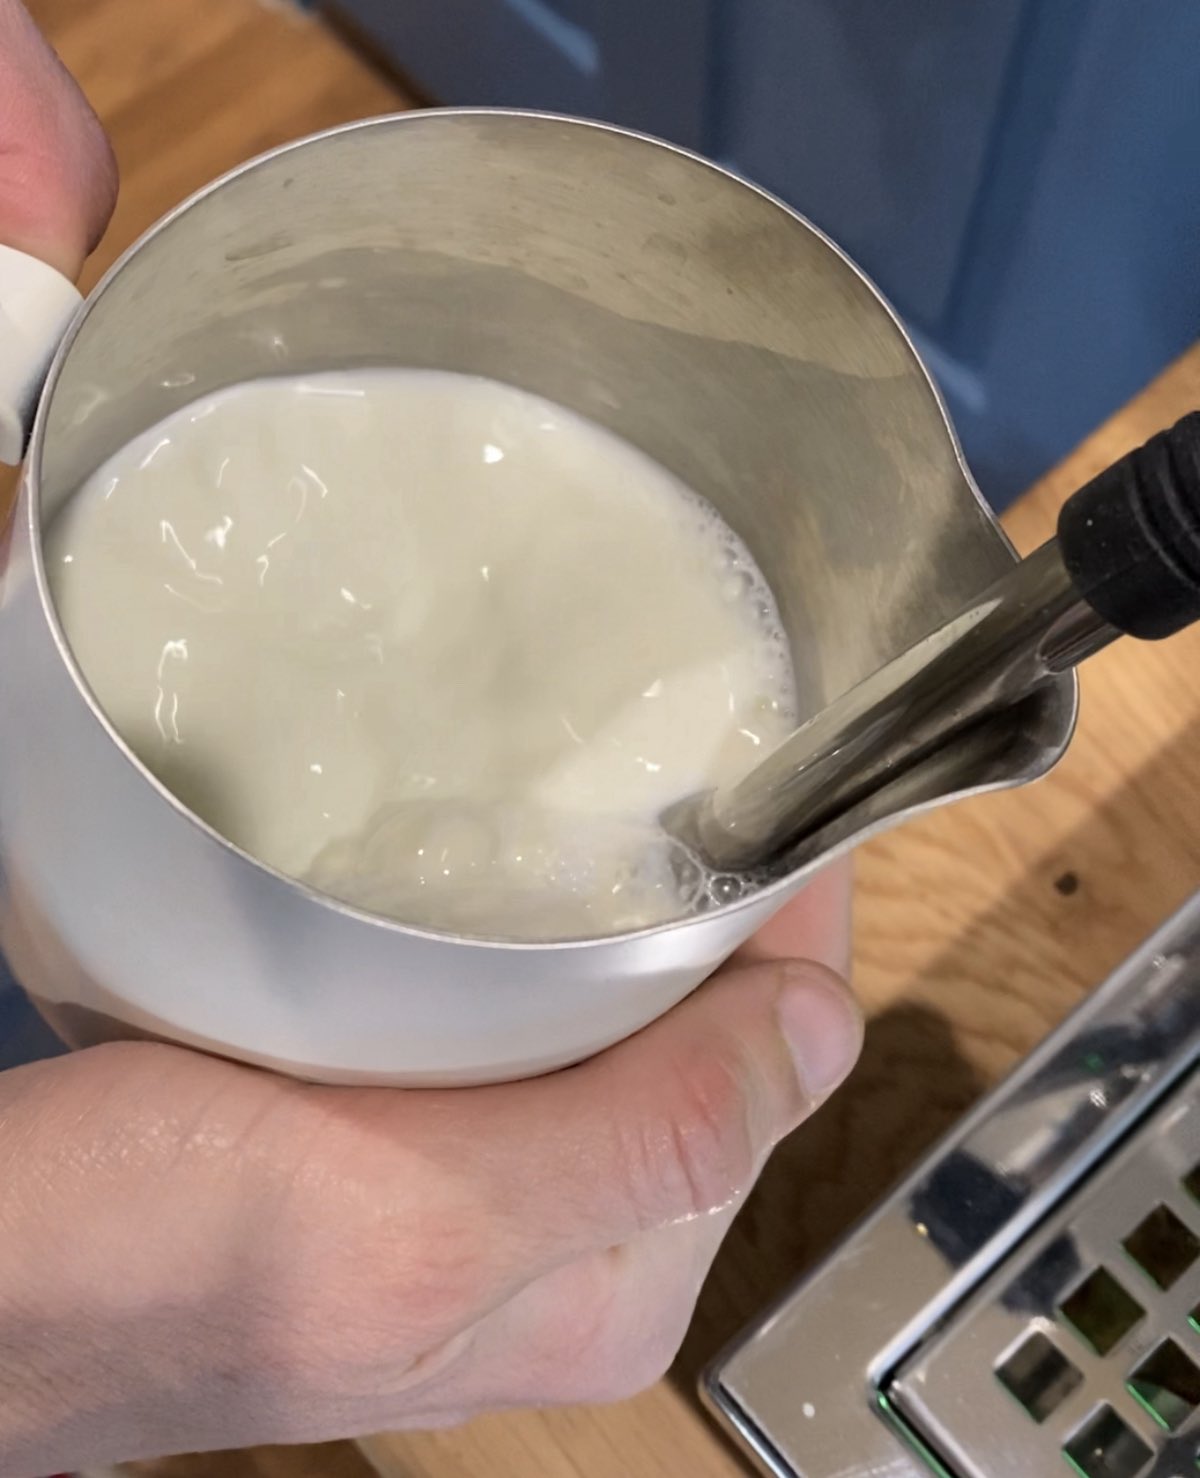 The Difference Between Steaming and Frothing Milk - Barista Skills